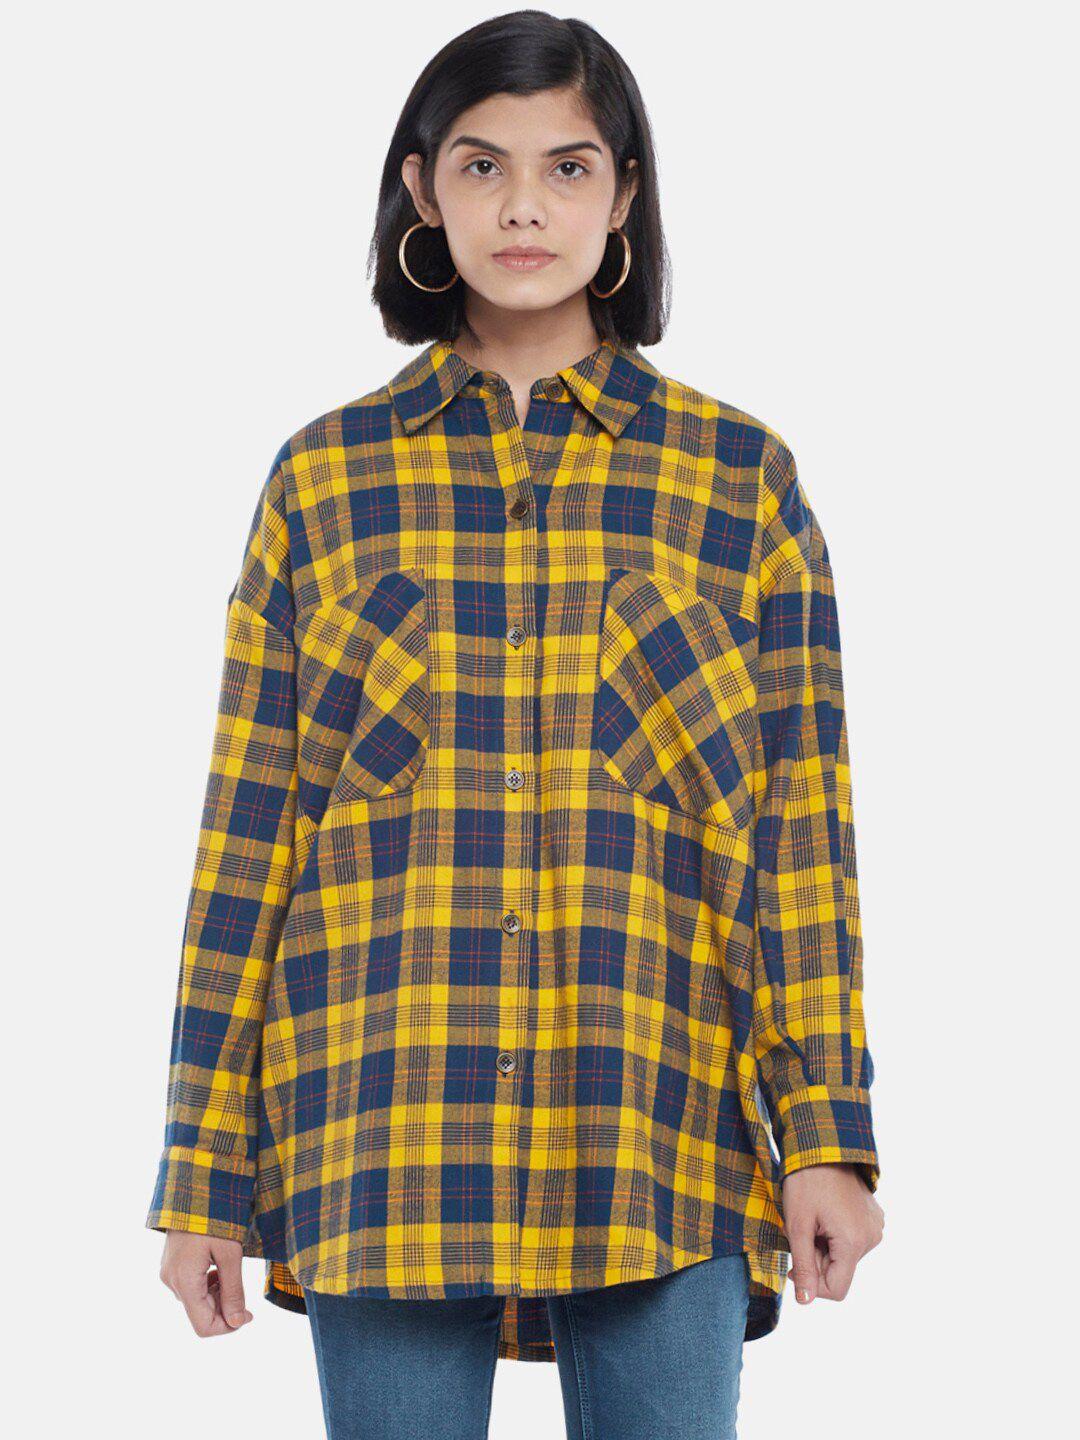 sf jeans by pantaloons women mustard yellow & navy blue cotton checked casual shirt